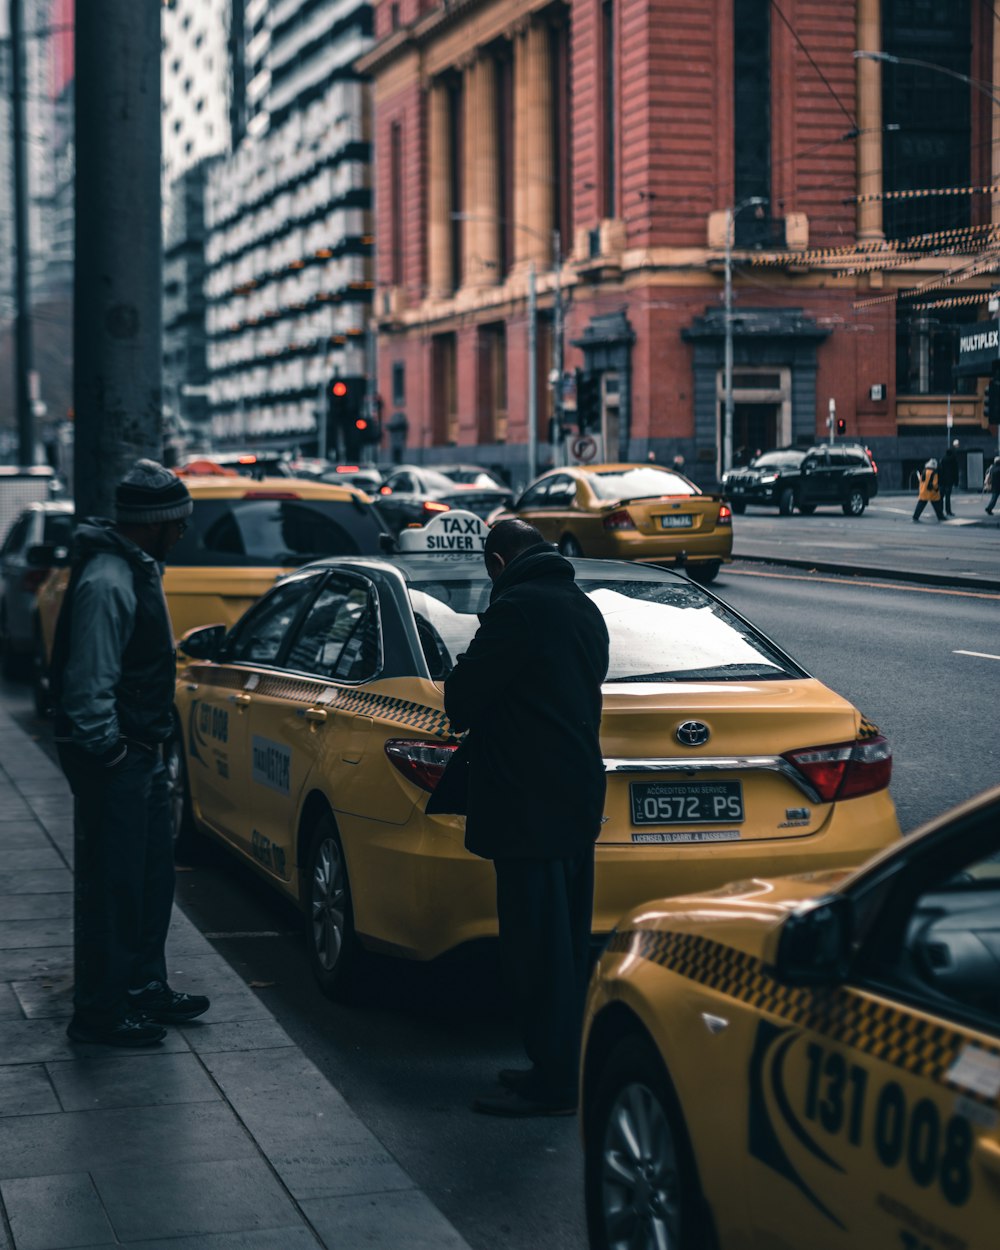 person wearing black trench coat standing on yellow cab